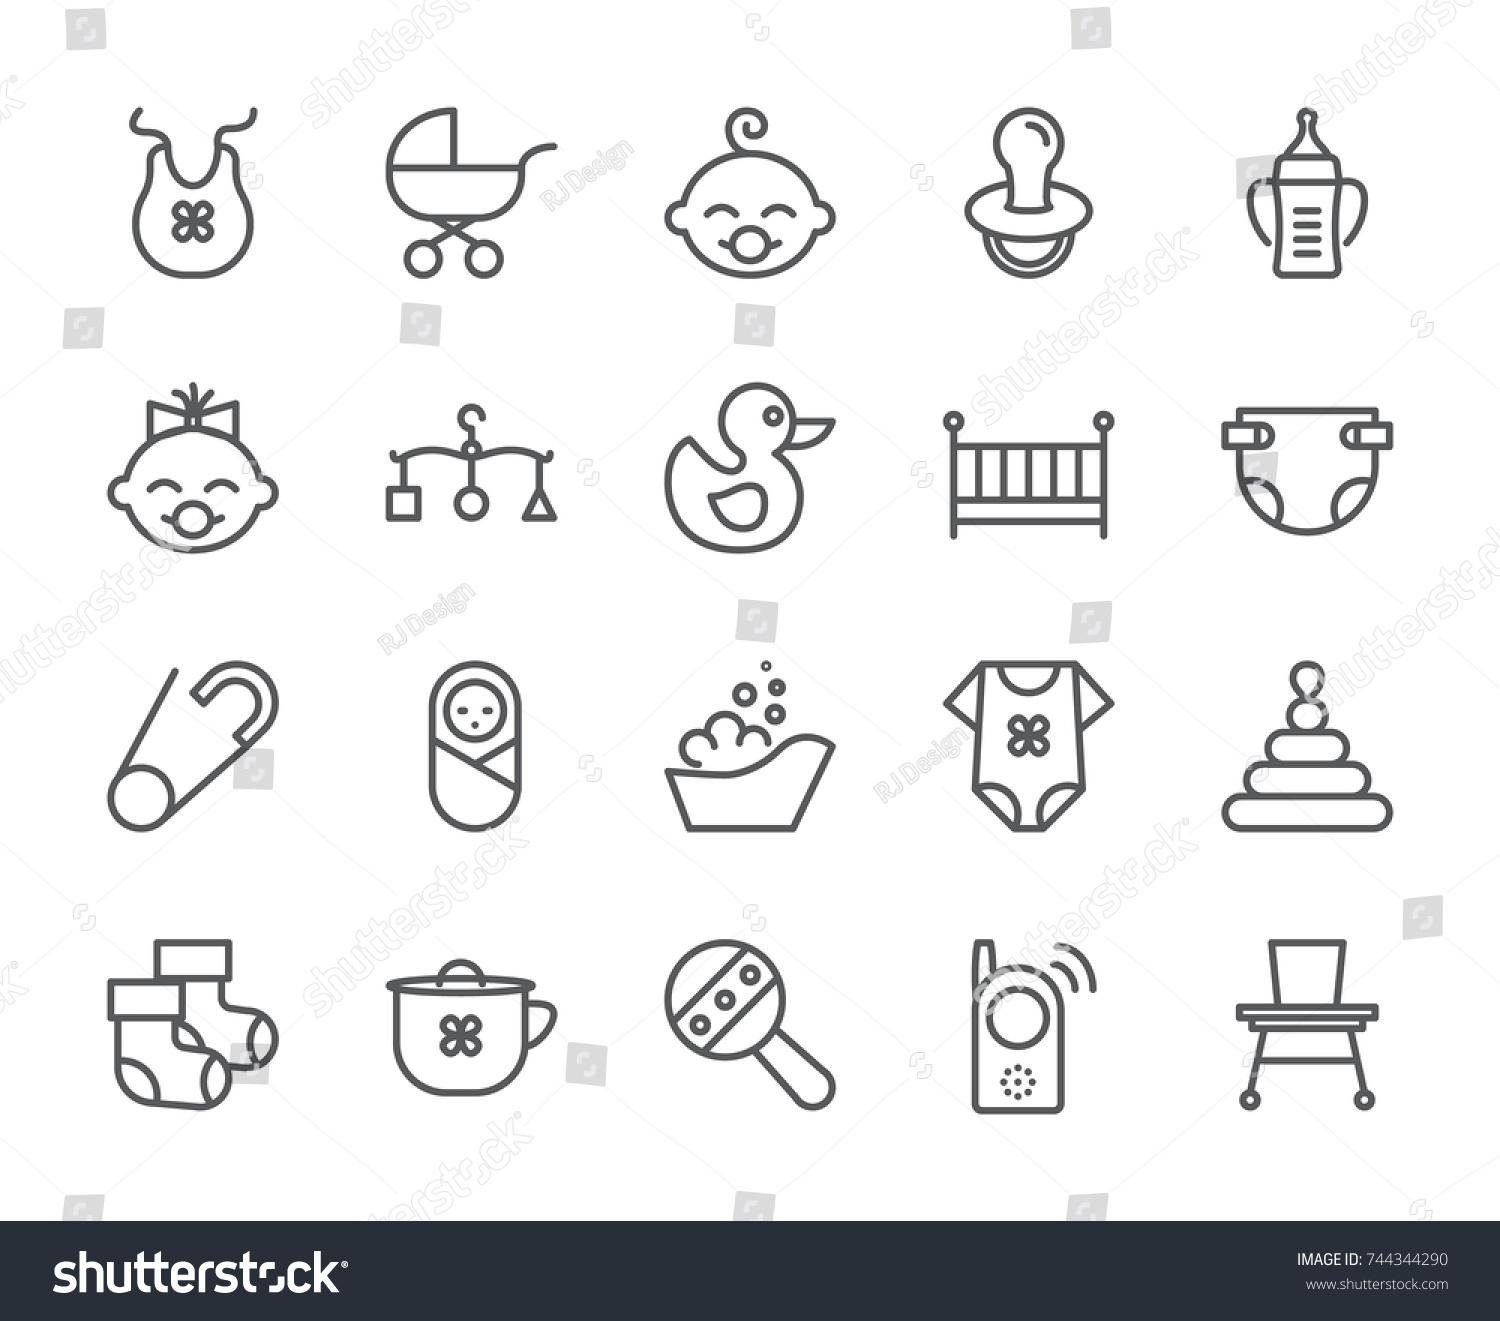 SVG of Baby born pixel perfect icons set with different child and motherhood symbols and accessories elements. Isolated 48x48 pixels pictograms vector illustration. svg